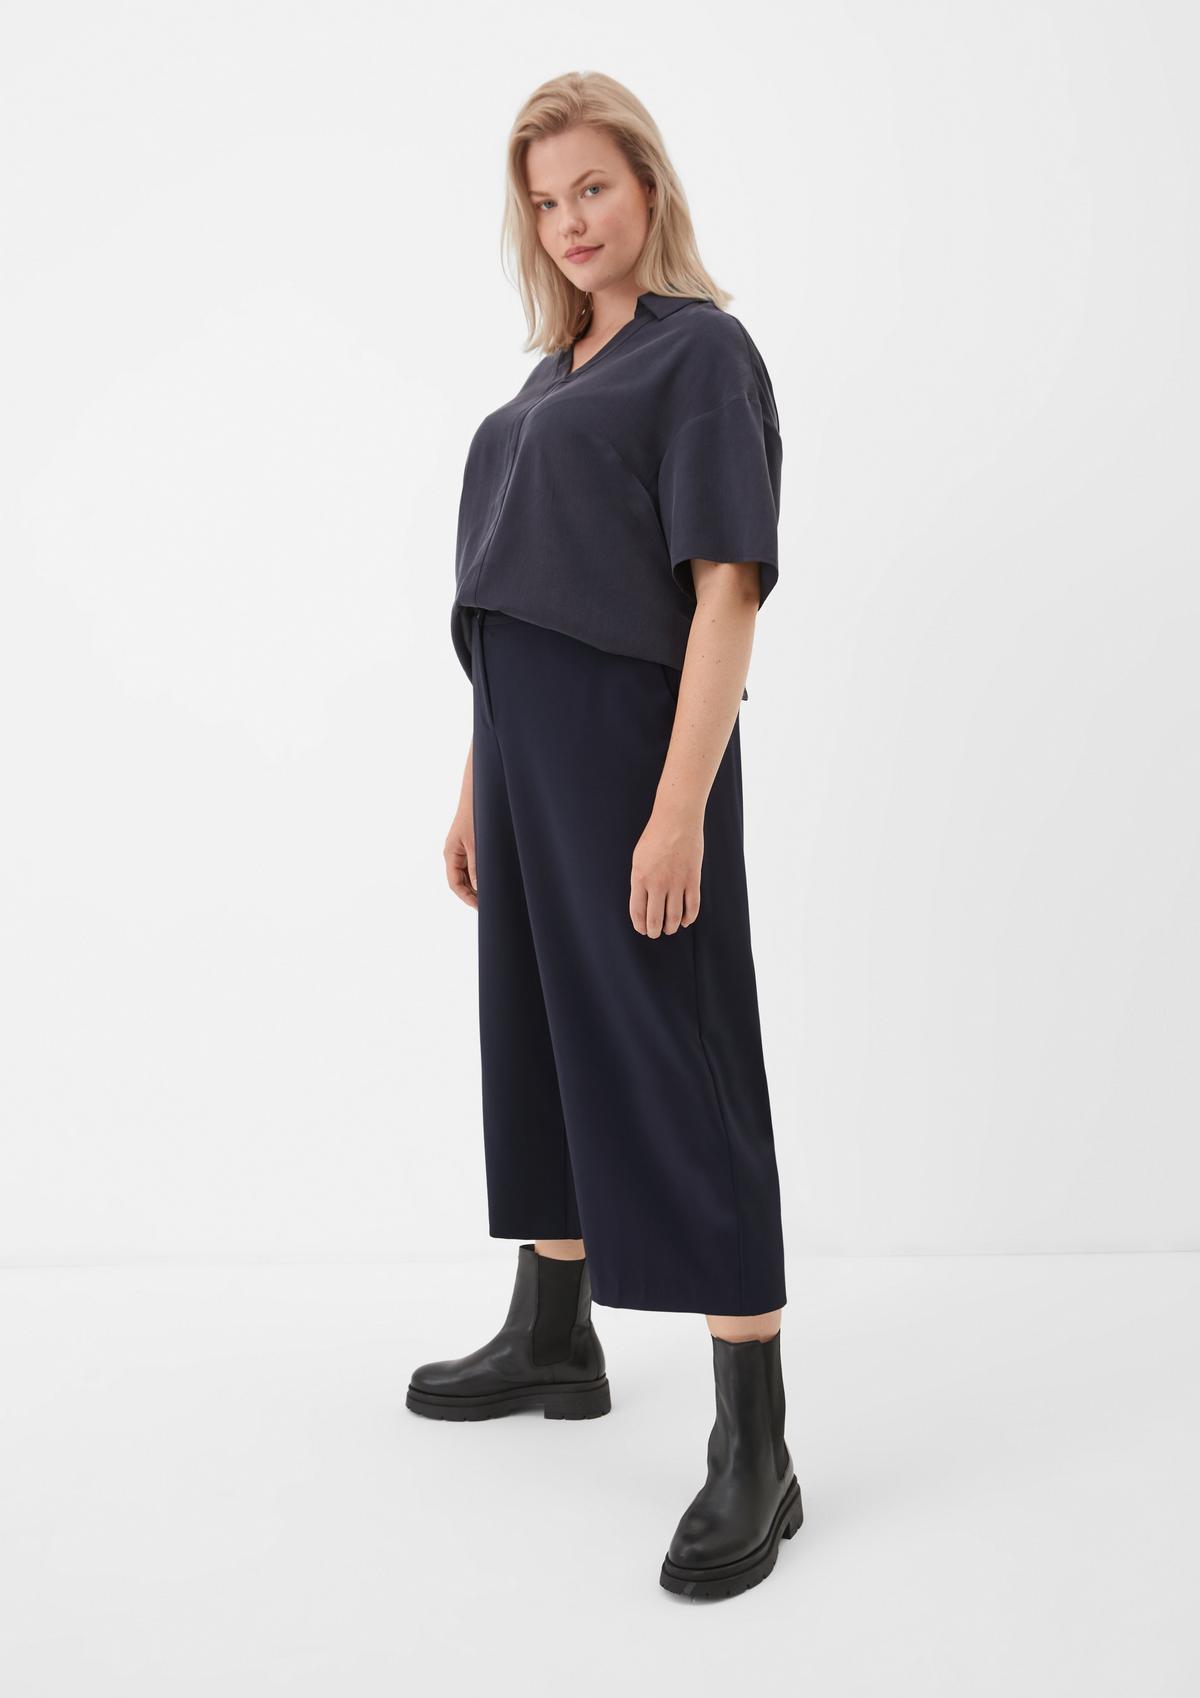 shop now Culottes: online in the Order